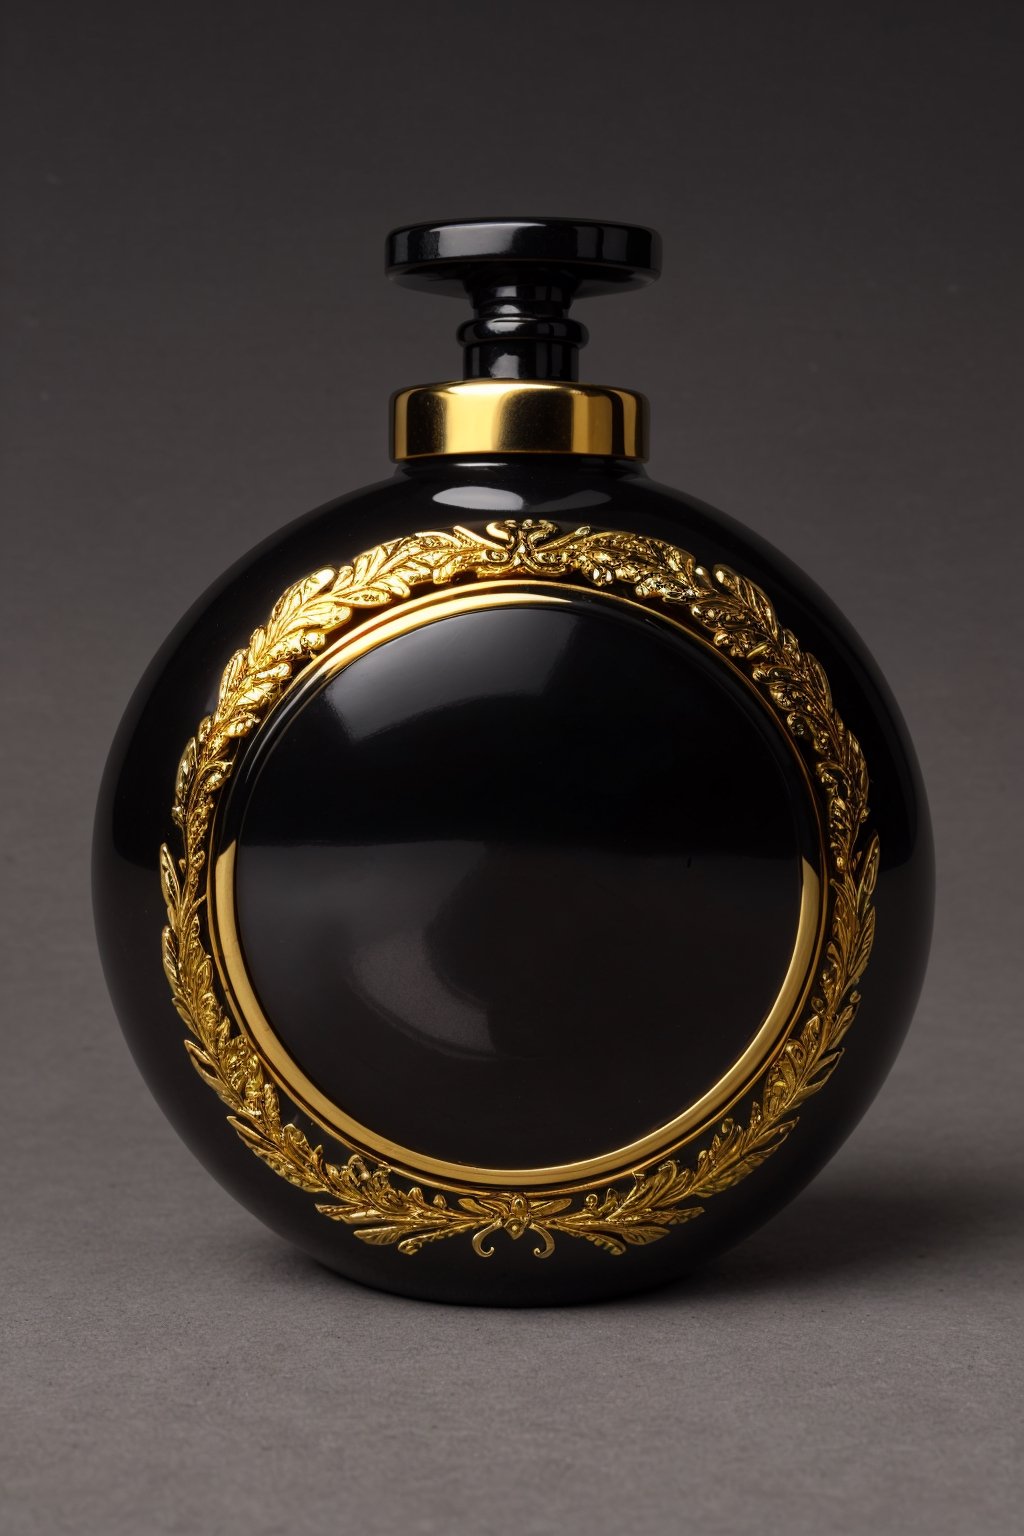 SD 1.5, beautiful perfume bottle,  Arabian style bottle, mysterious, ((extremely detailed)), Obsidian, very expensive design, golden design 